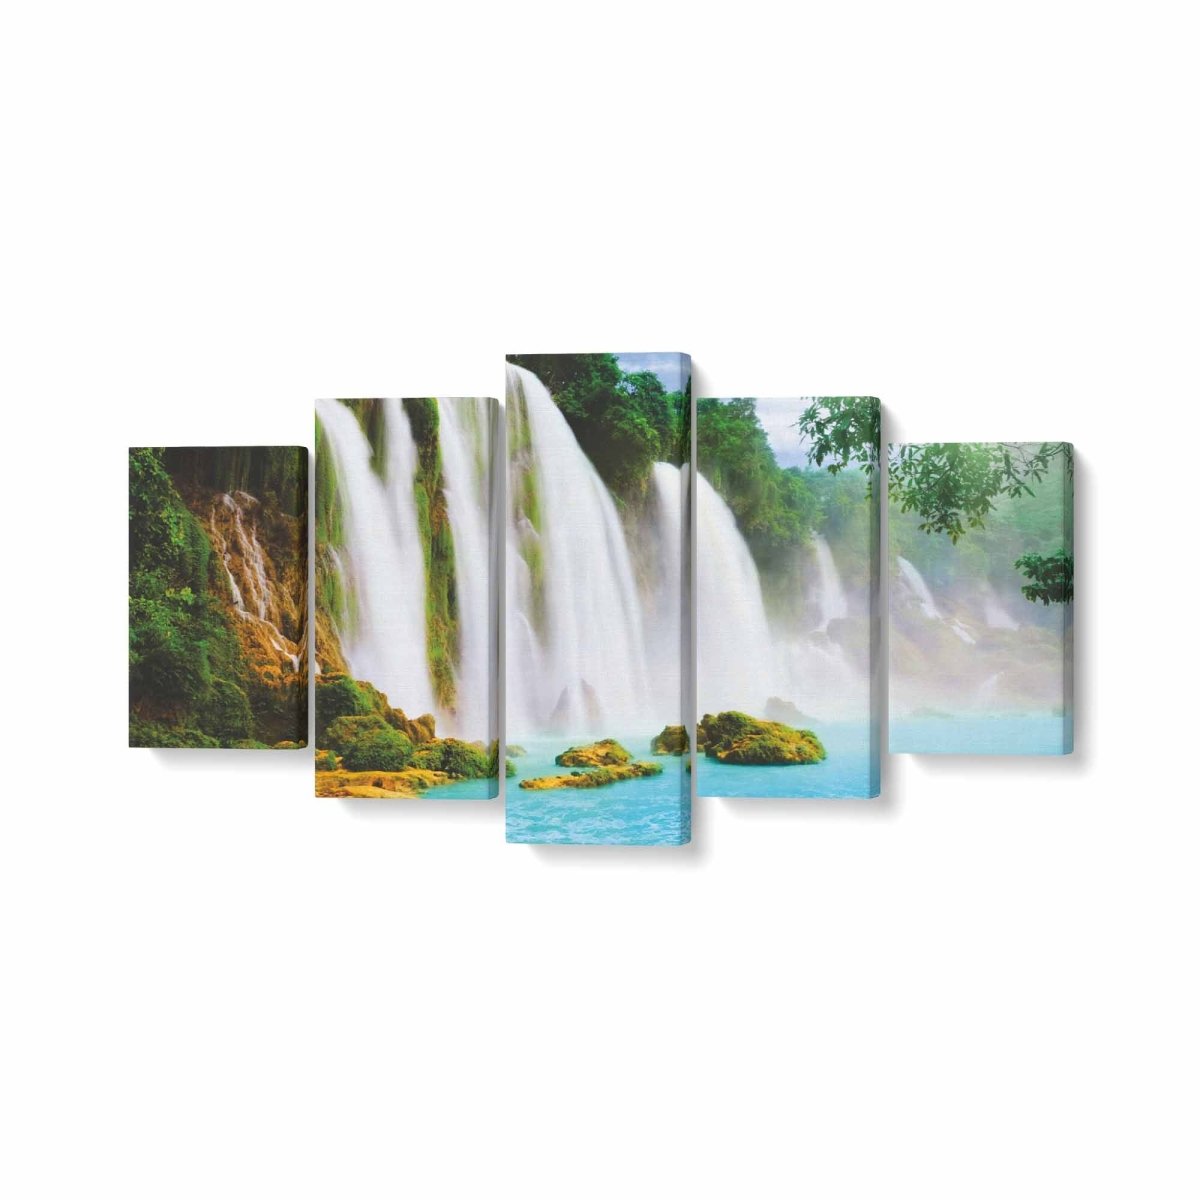 Tablou MultiCanvas 5 piese Detian Waterfall - clevny.ro